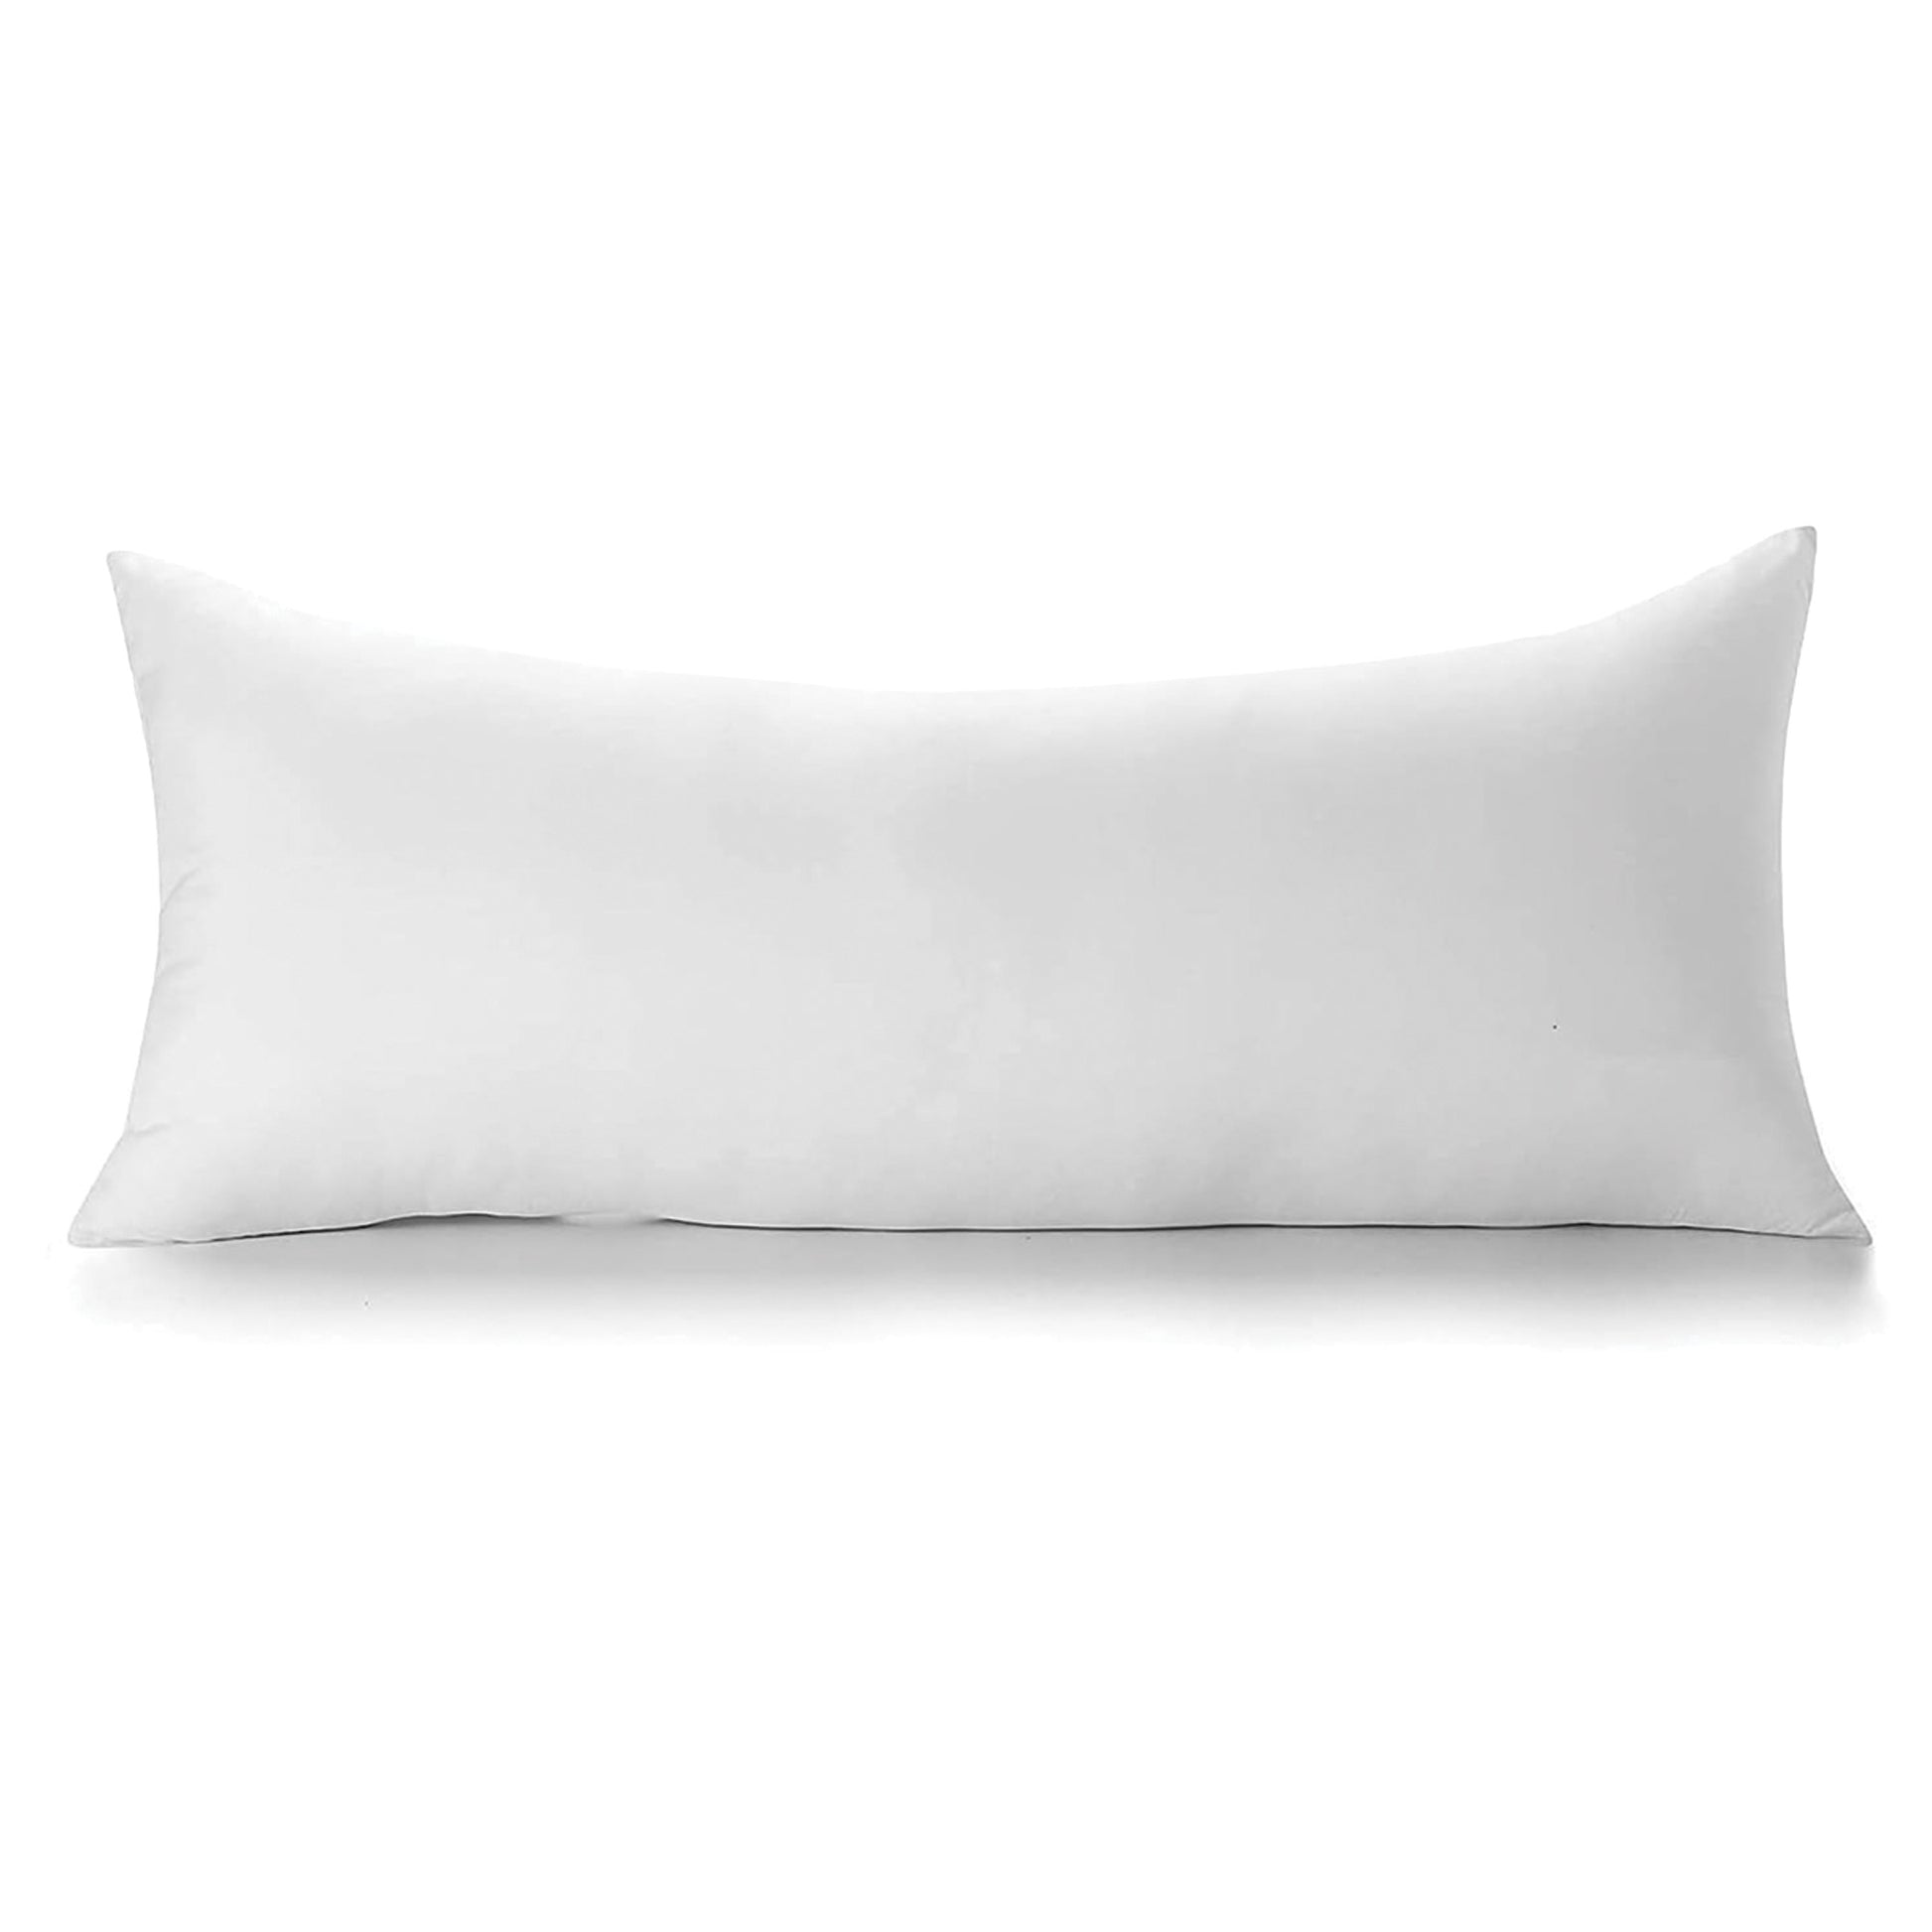 Experience the epitome of luxury with our deluxe body pillow, meticulously designed with a balanced 50% down and 50% feather composition. Revel in the cloud-like softness and gentle yet supportive embrace, ensuring nights of unparalleled comfort and relaxation.